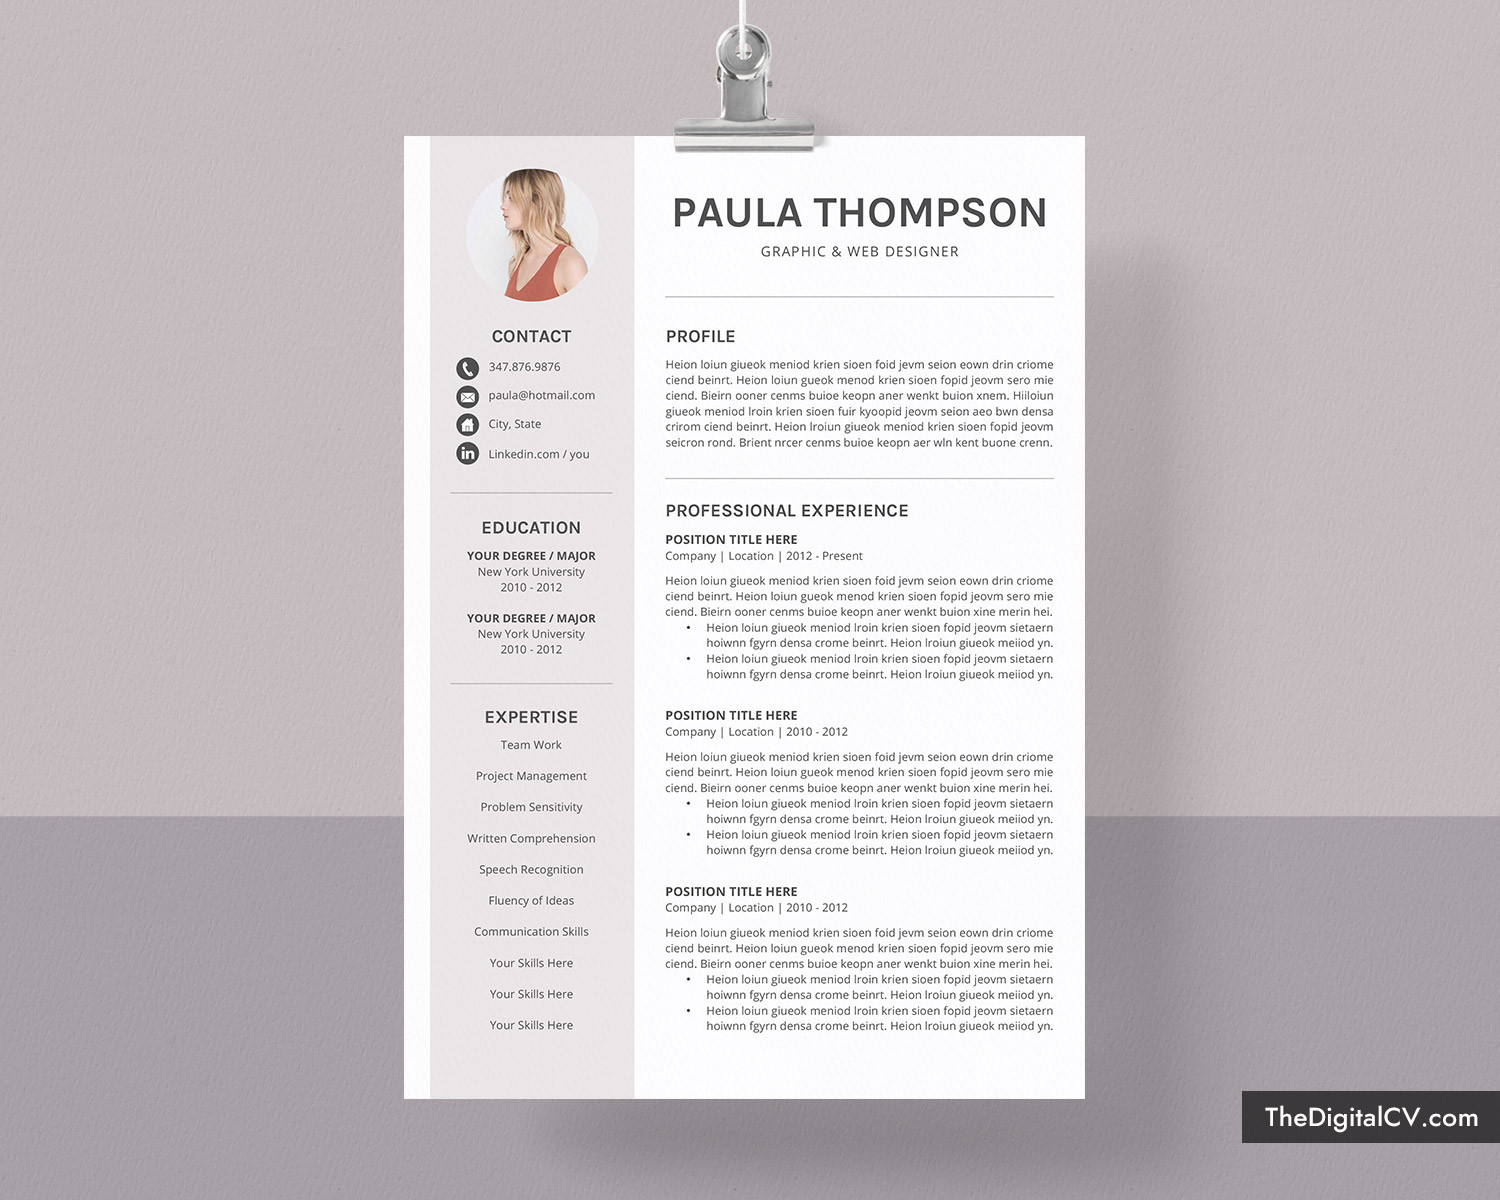 Modern Professional Resume Template Free Download Modern Cv Template for Microsoft Word, Simple Cv Template Design, Clean Resume, Creative Resume, Professional Resume, Job Resume, Editable Resume, …